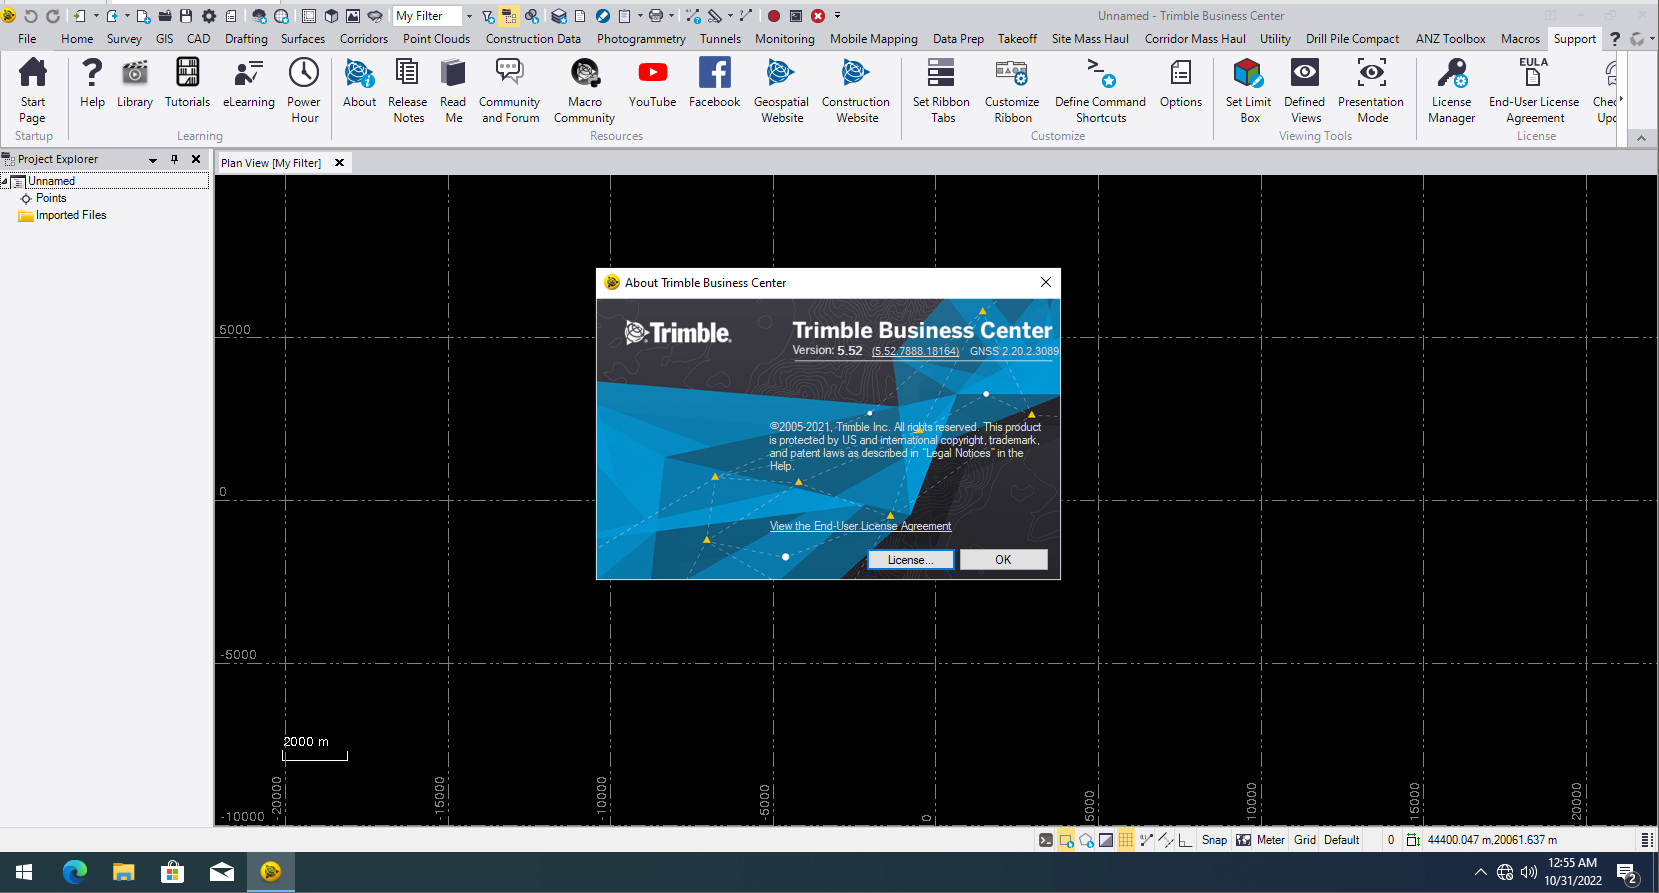 Working with Trimble Business Center 5.52 full license